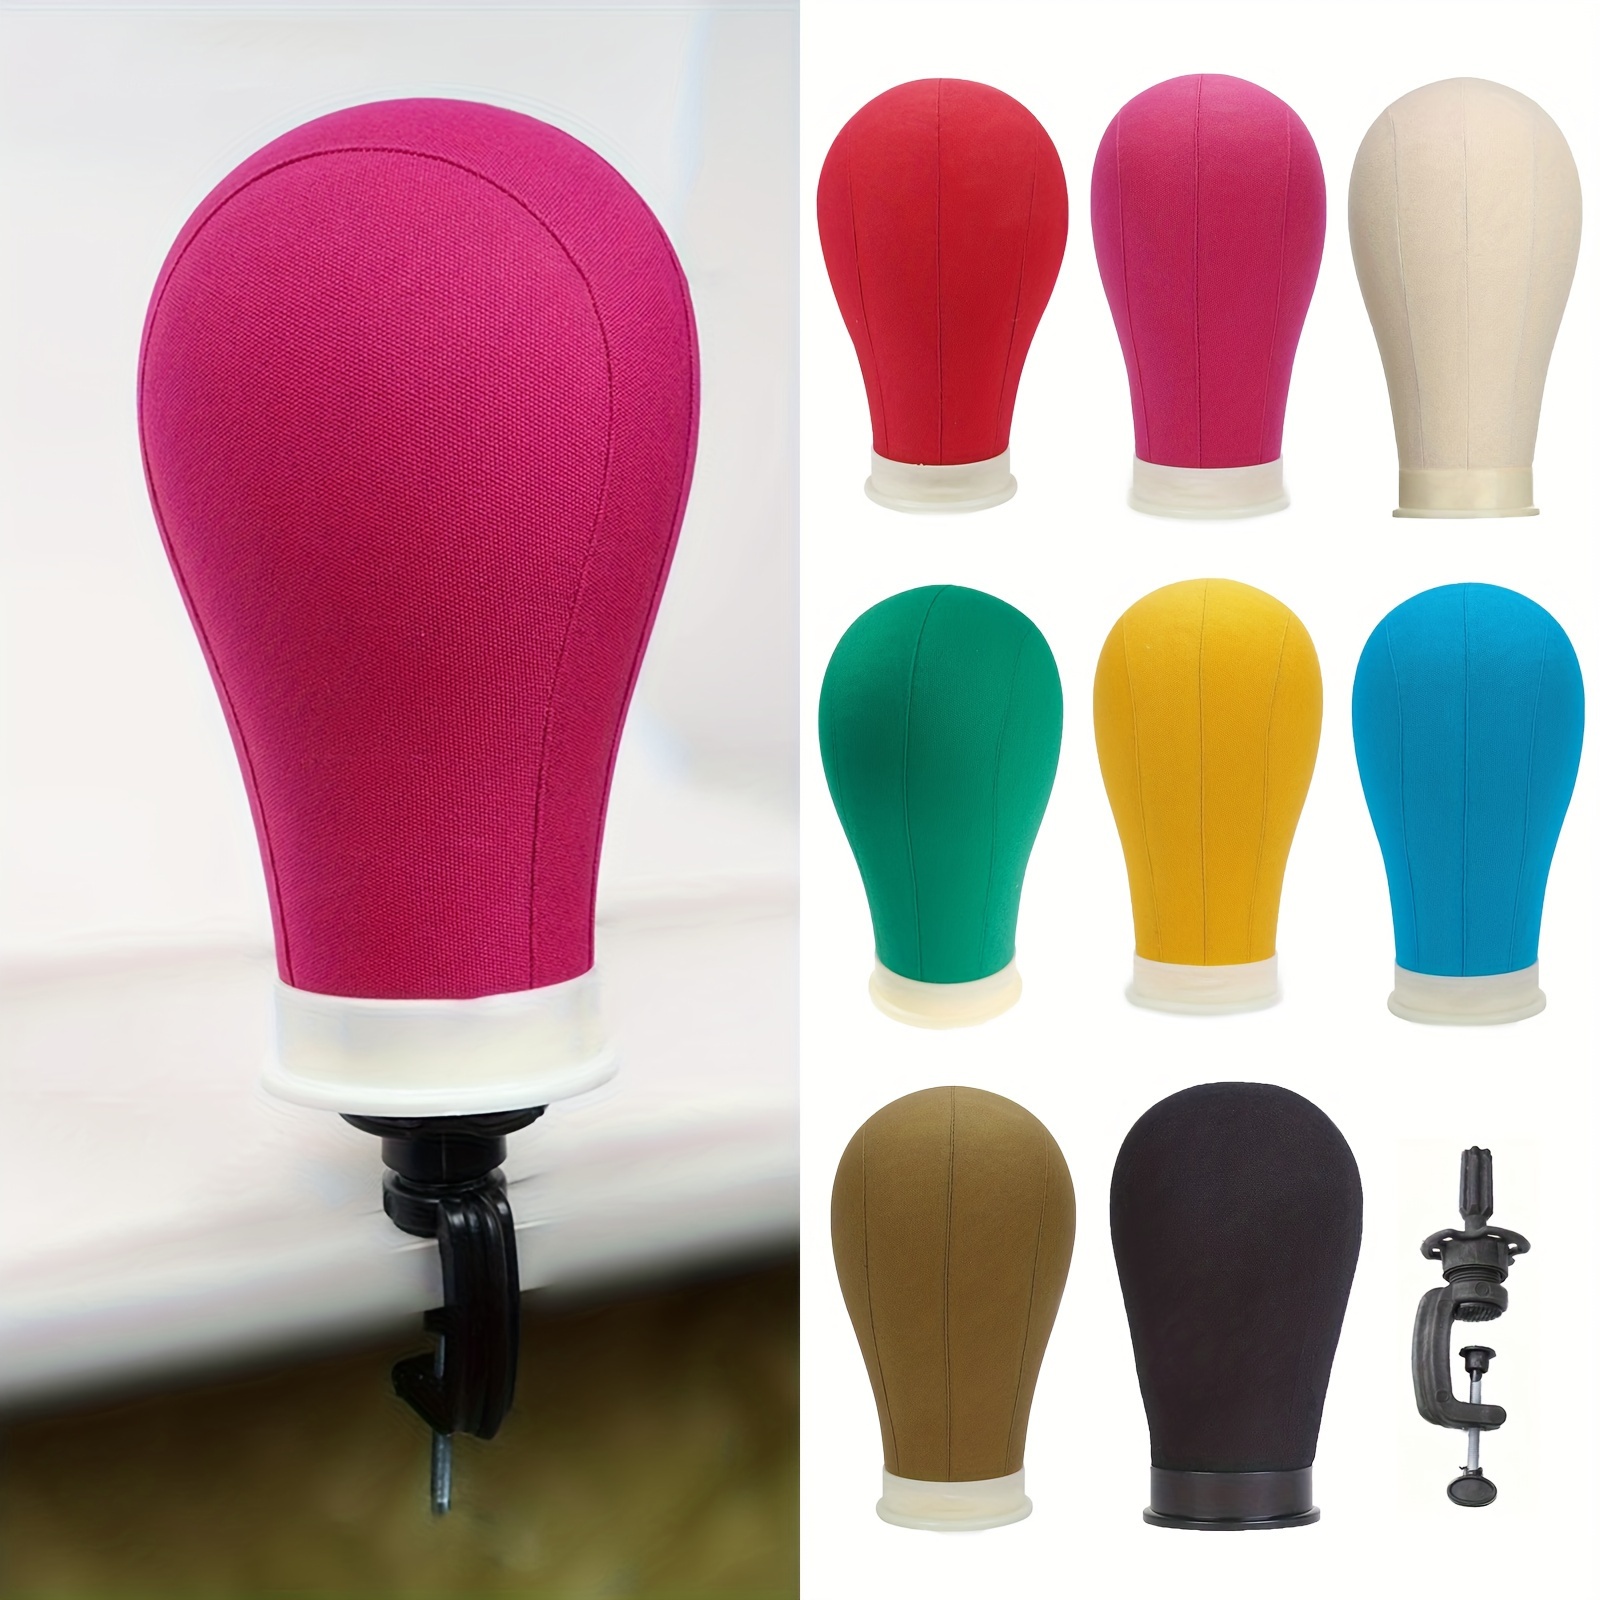 Wig Stand 1pc Adjustable Height Portable Wig Holder Stands Non-Slip Wig Head Holders Durable Plastic Wig Head Stand for Multiple Wigs and Hats